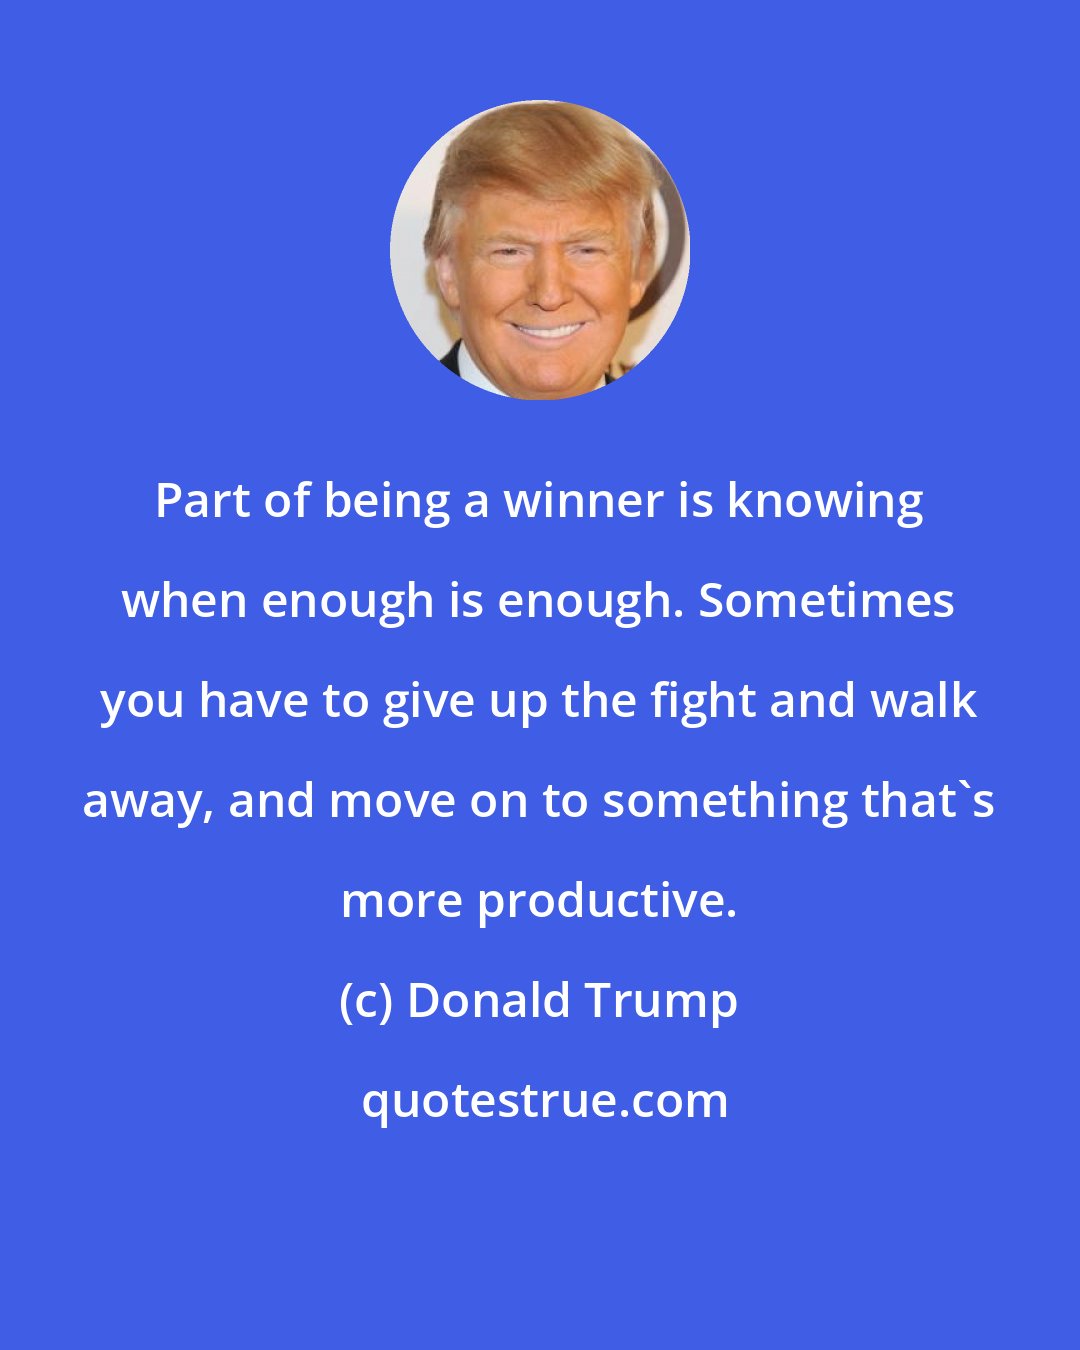 Donald Trump: Part of being a winner is knowing when enough is enough. Sometimes you have to give up the fight and walk away, and move on to something that's more productive.